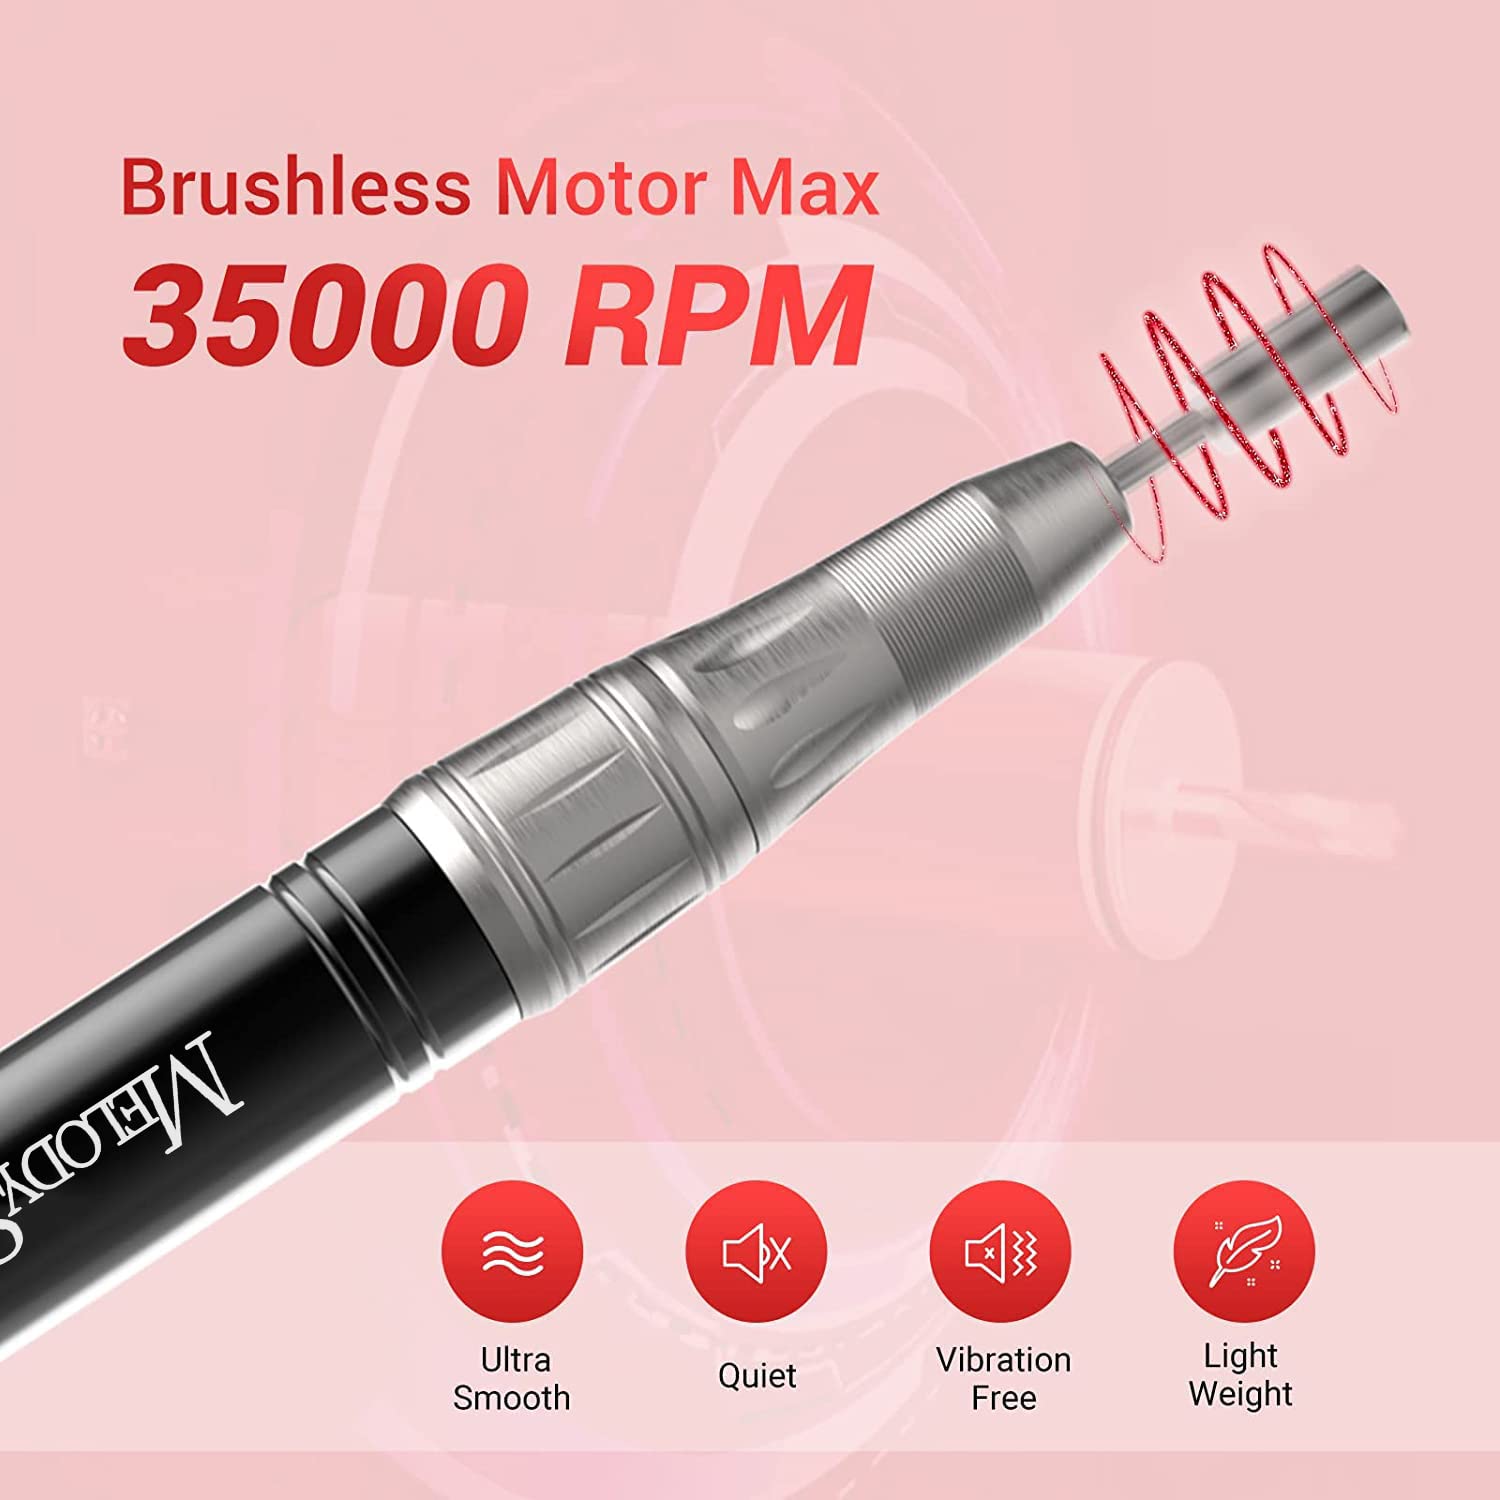 MR3-Kanon Rechargeable Nail Drill 35,000 RPM